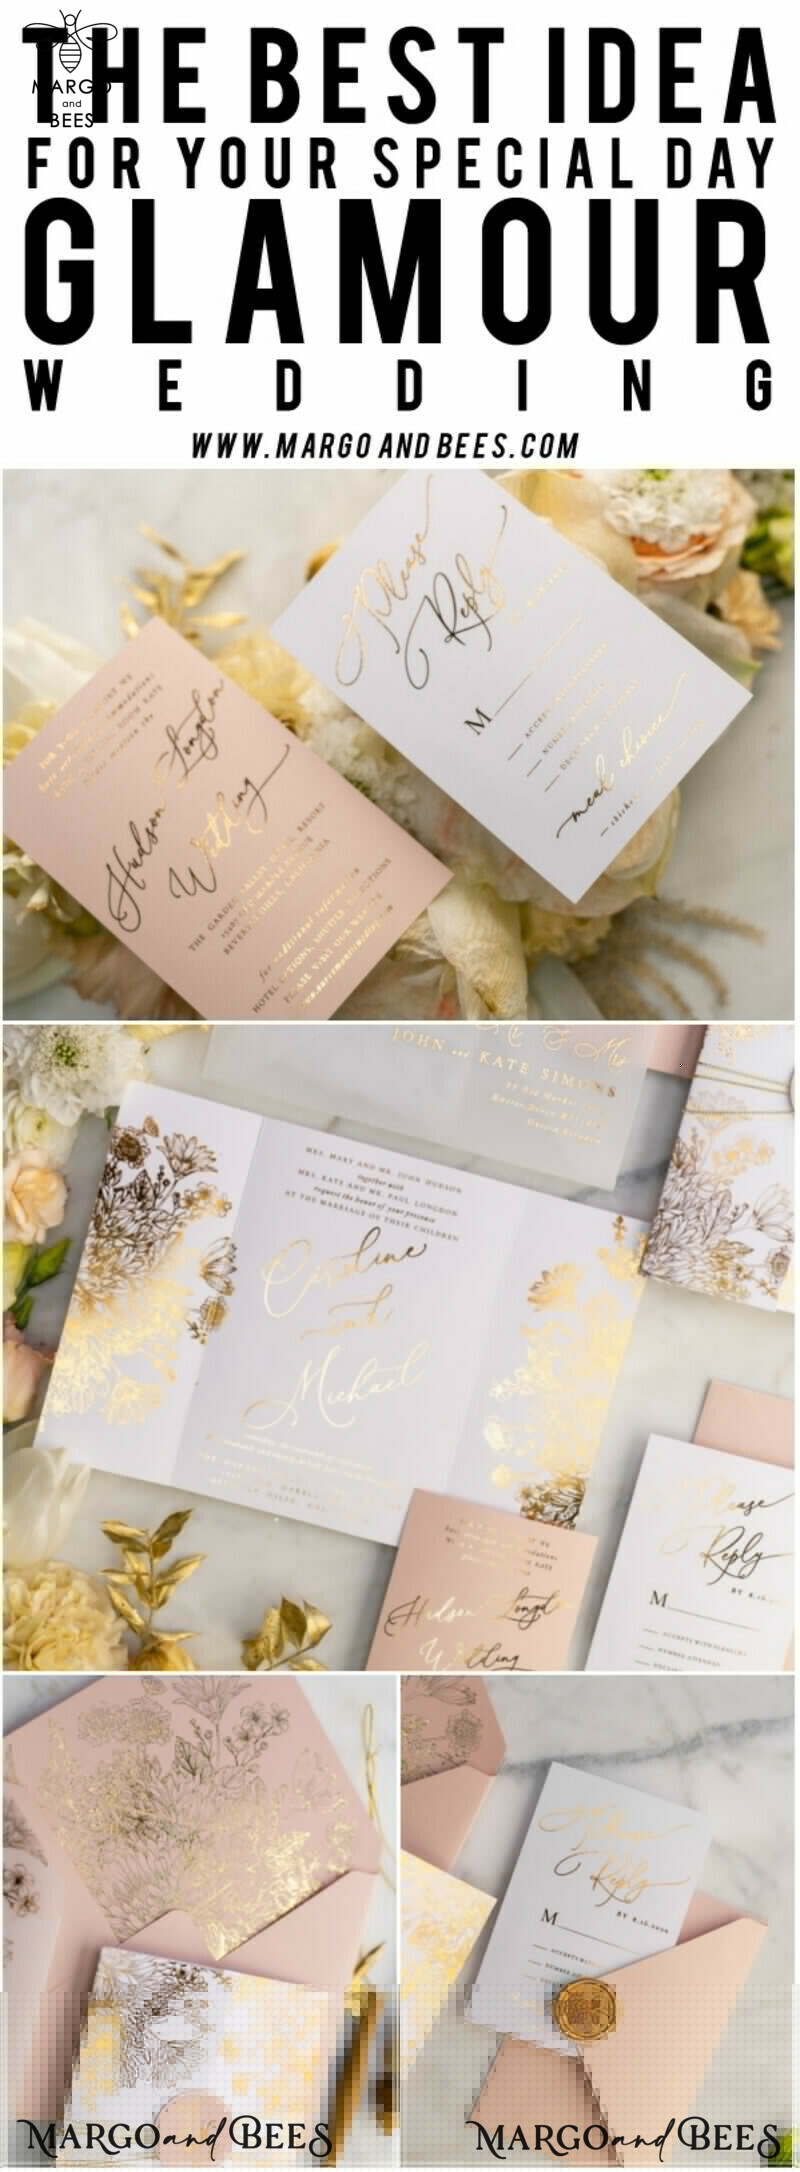 Elegant Arabic Golden Wedding Invitations with Glamour Gold Foil and Romantic Blush Pink - Exquisite Bespoke Indian Wedding Stationery-45